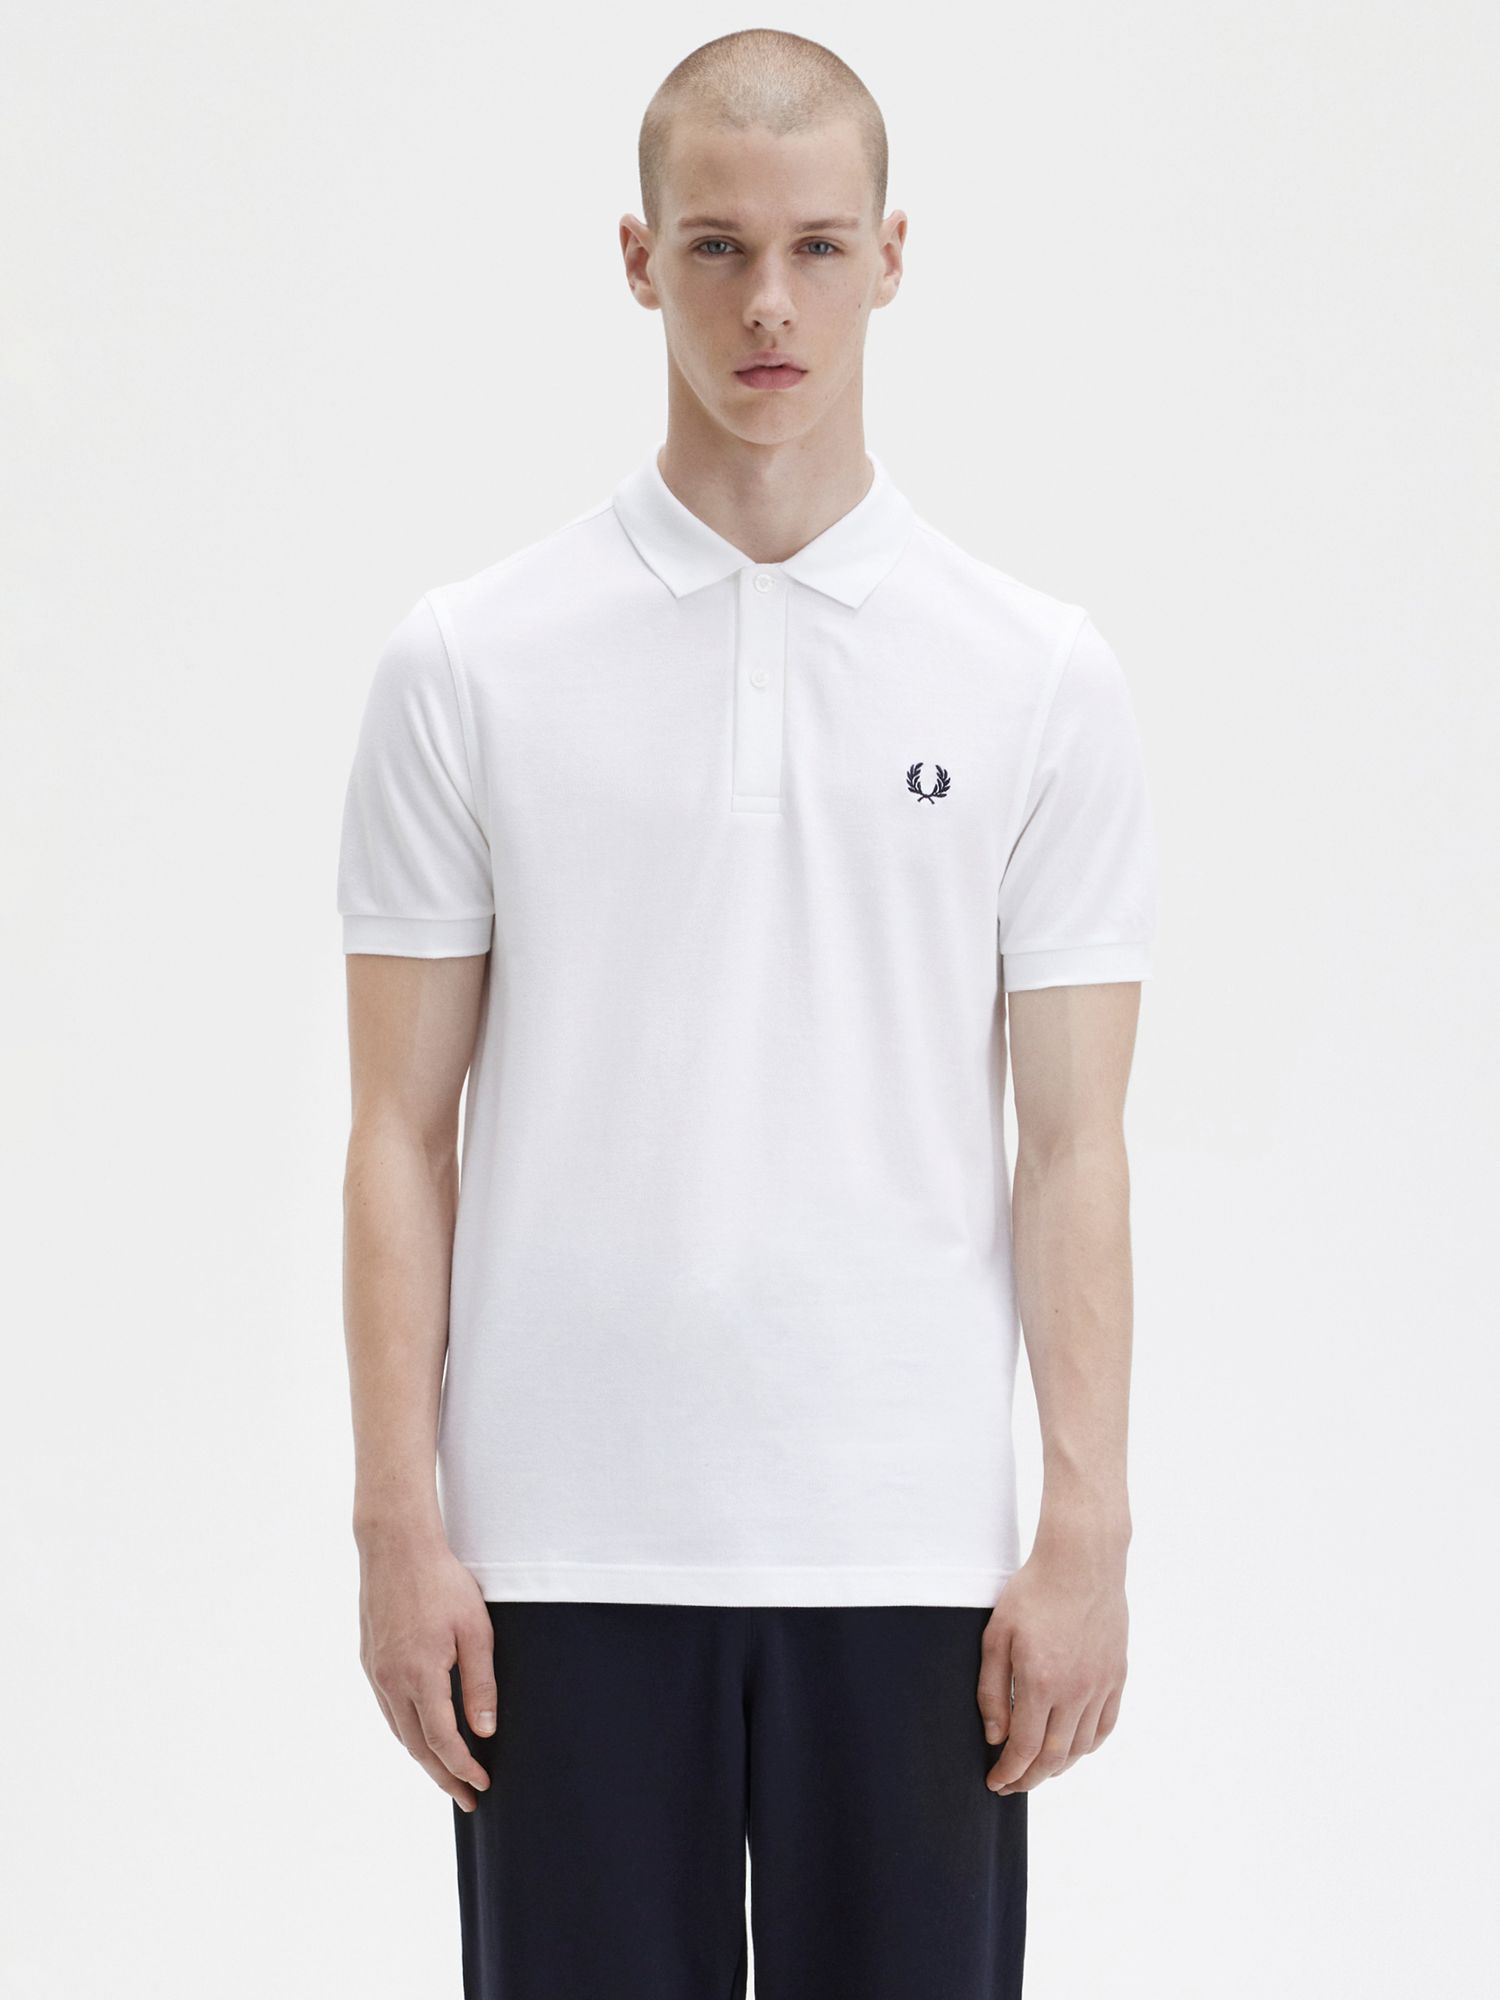 FRED PERRY: Polo Shirt For Men White Fred Perry Polo Shirt M6000 Online ...